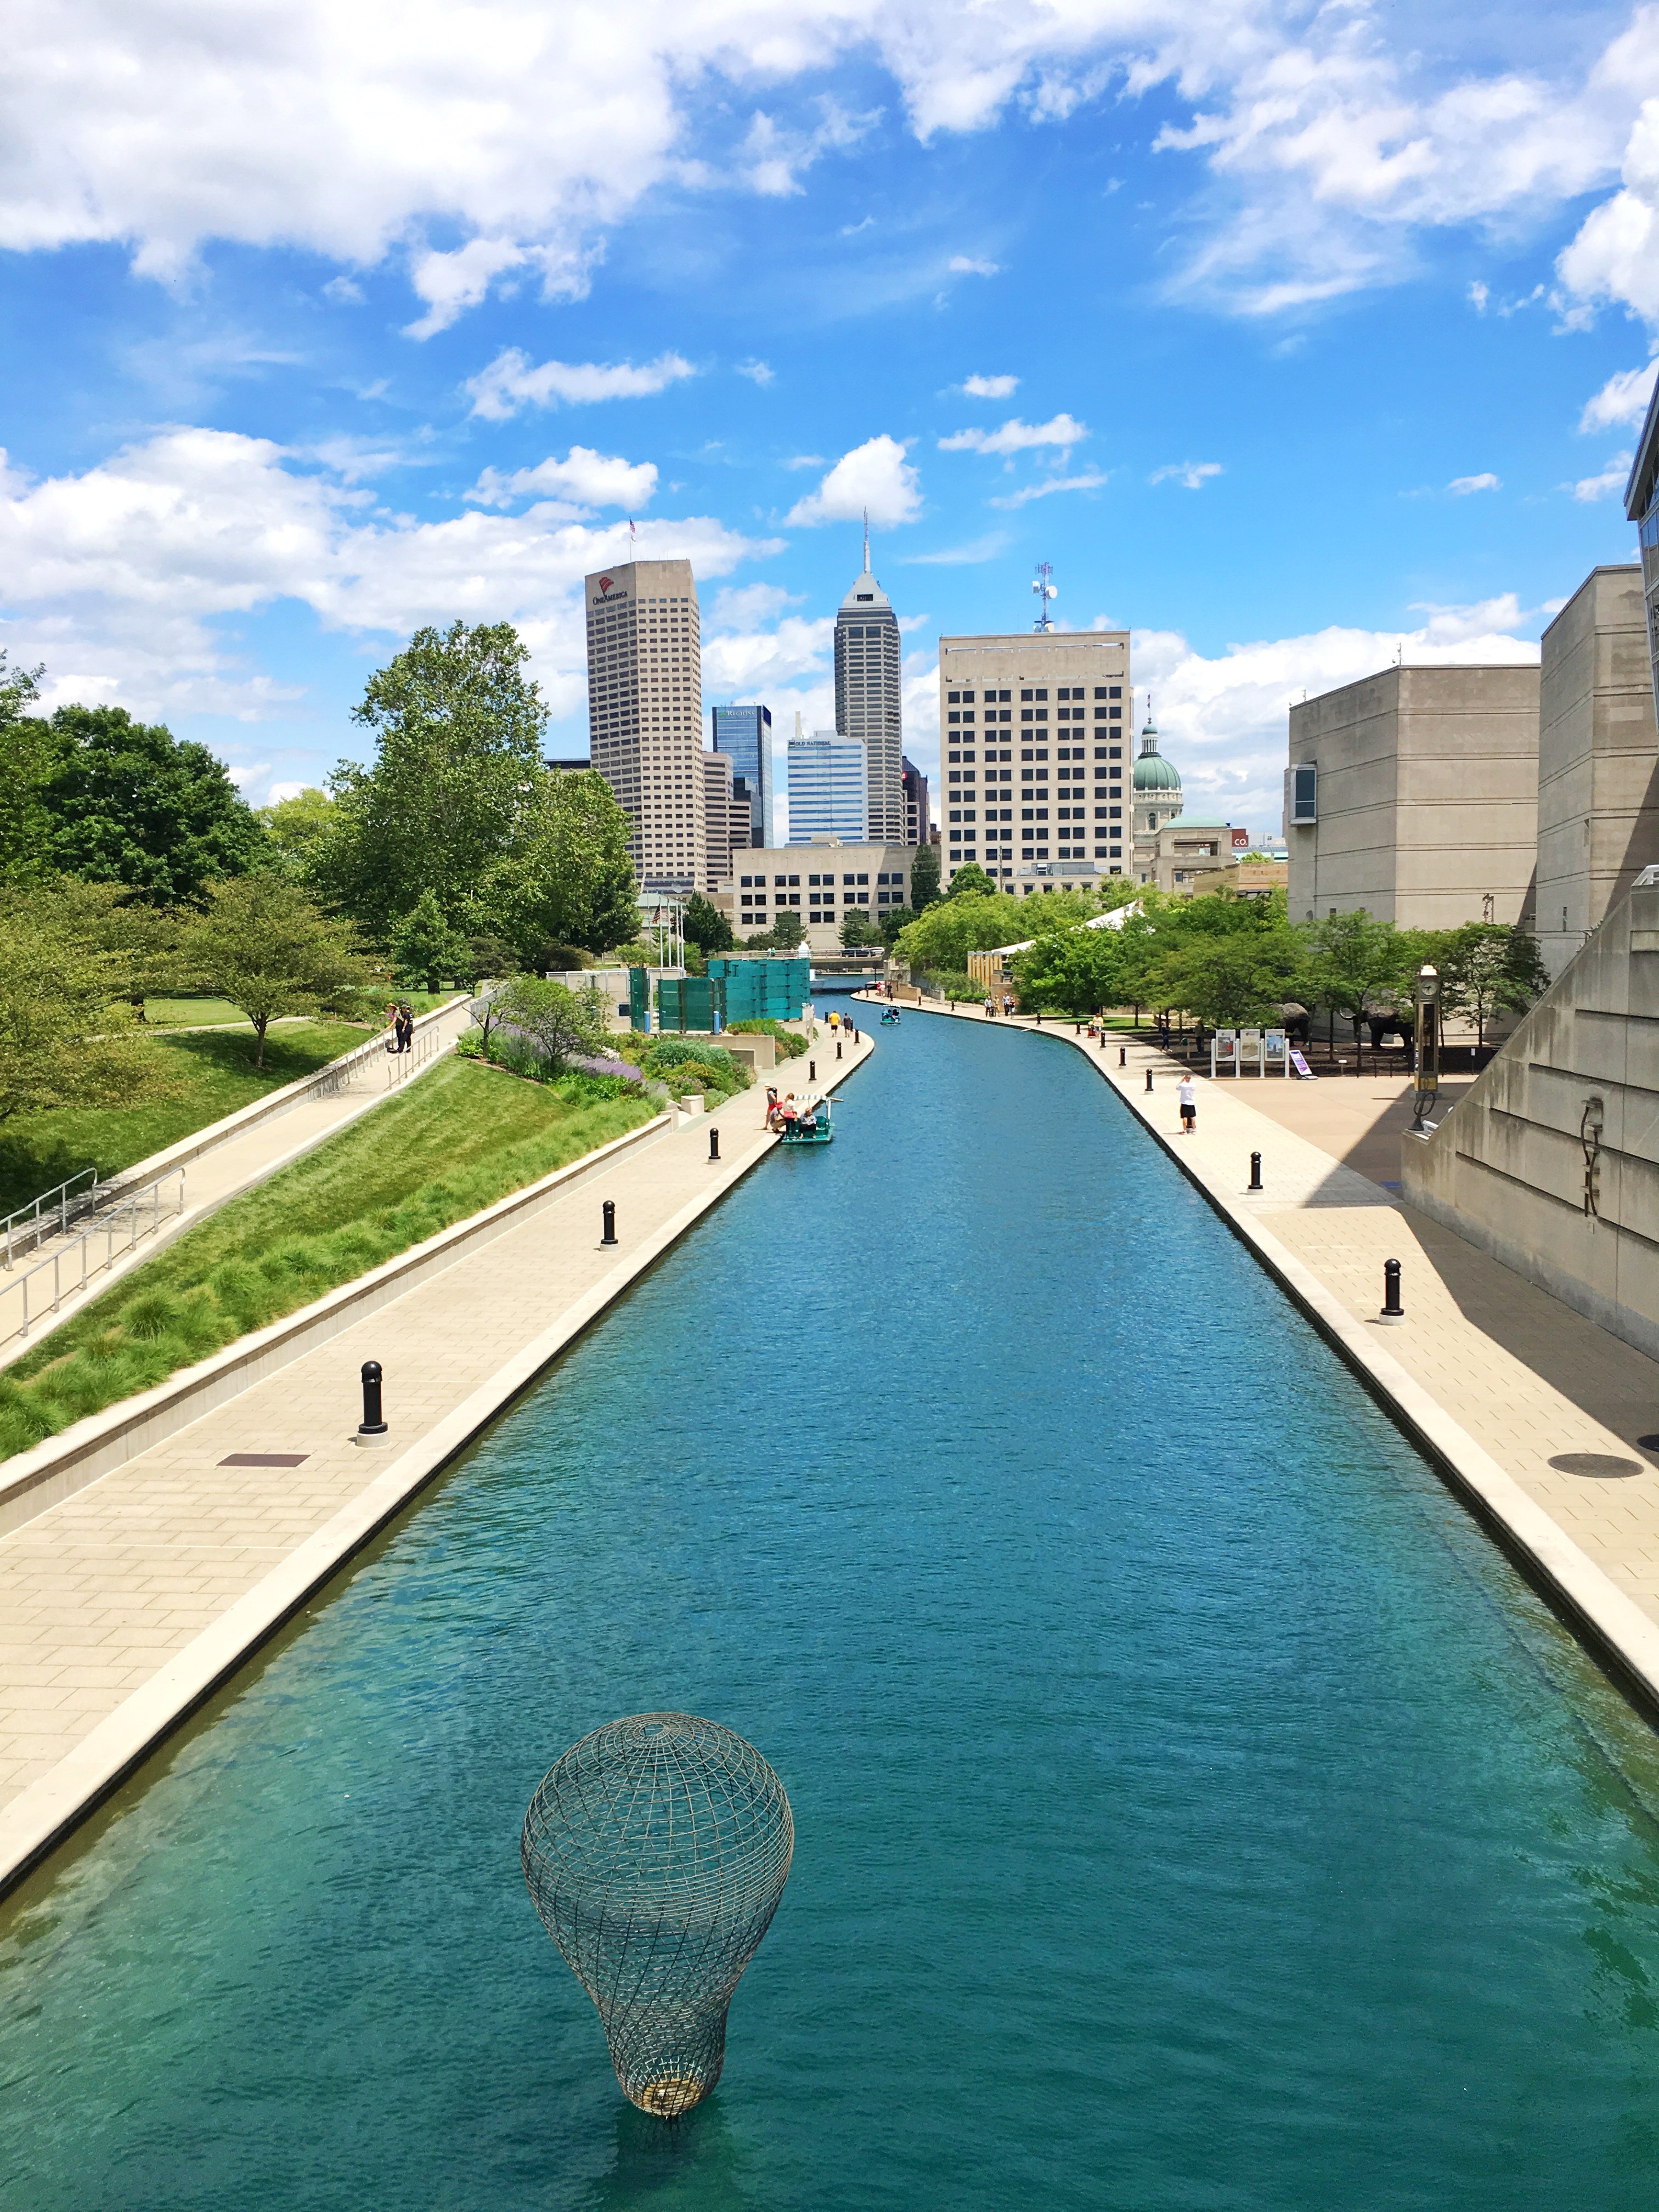 9 Fun Things to Do in Indianapolis as a 20-Something